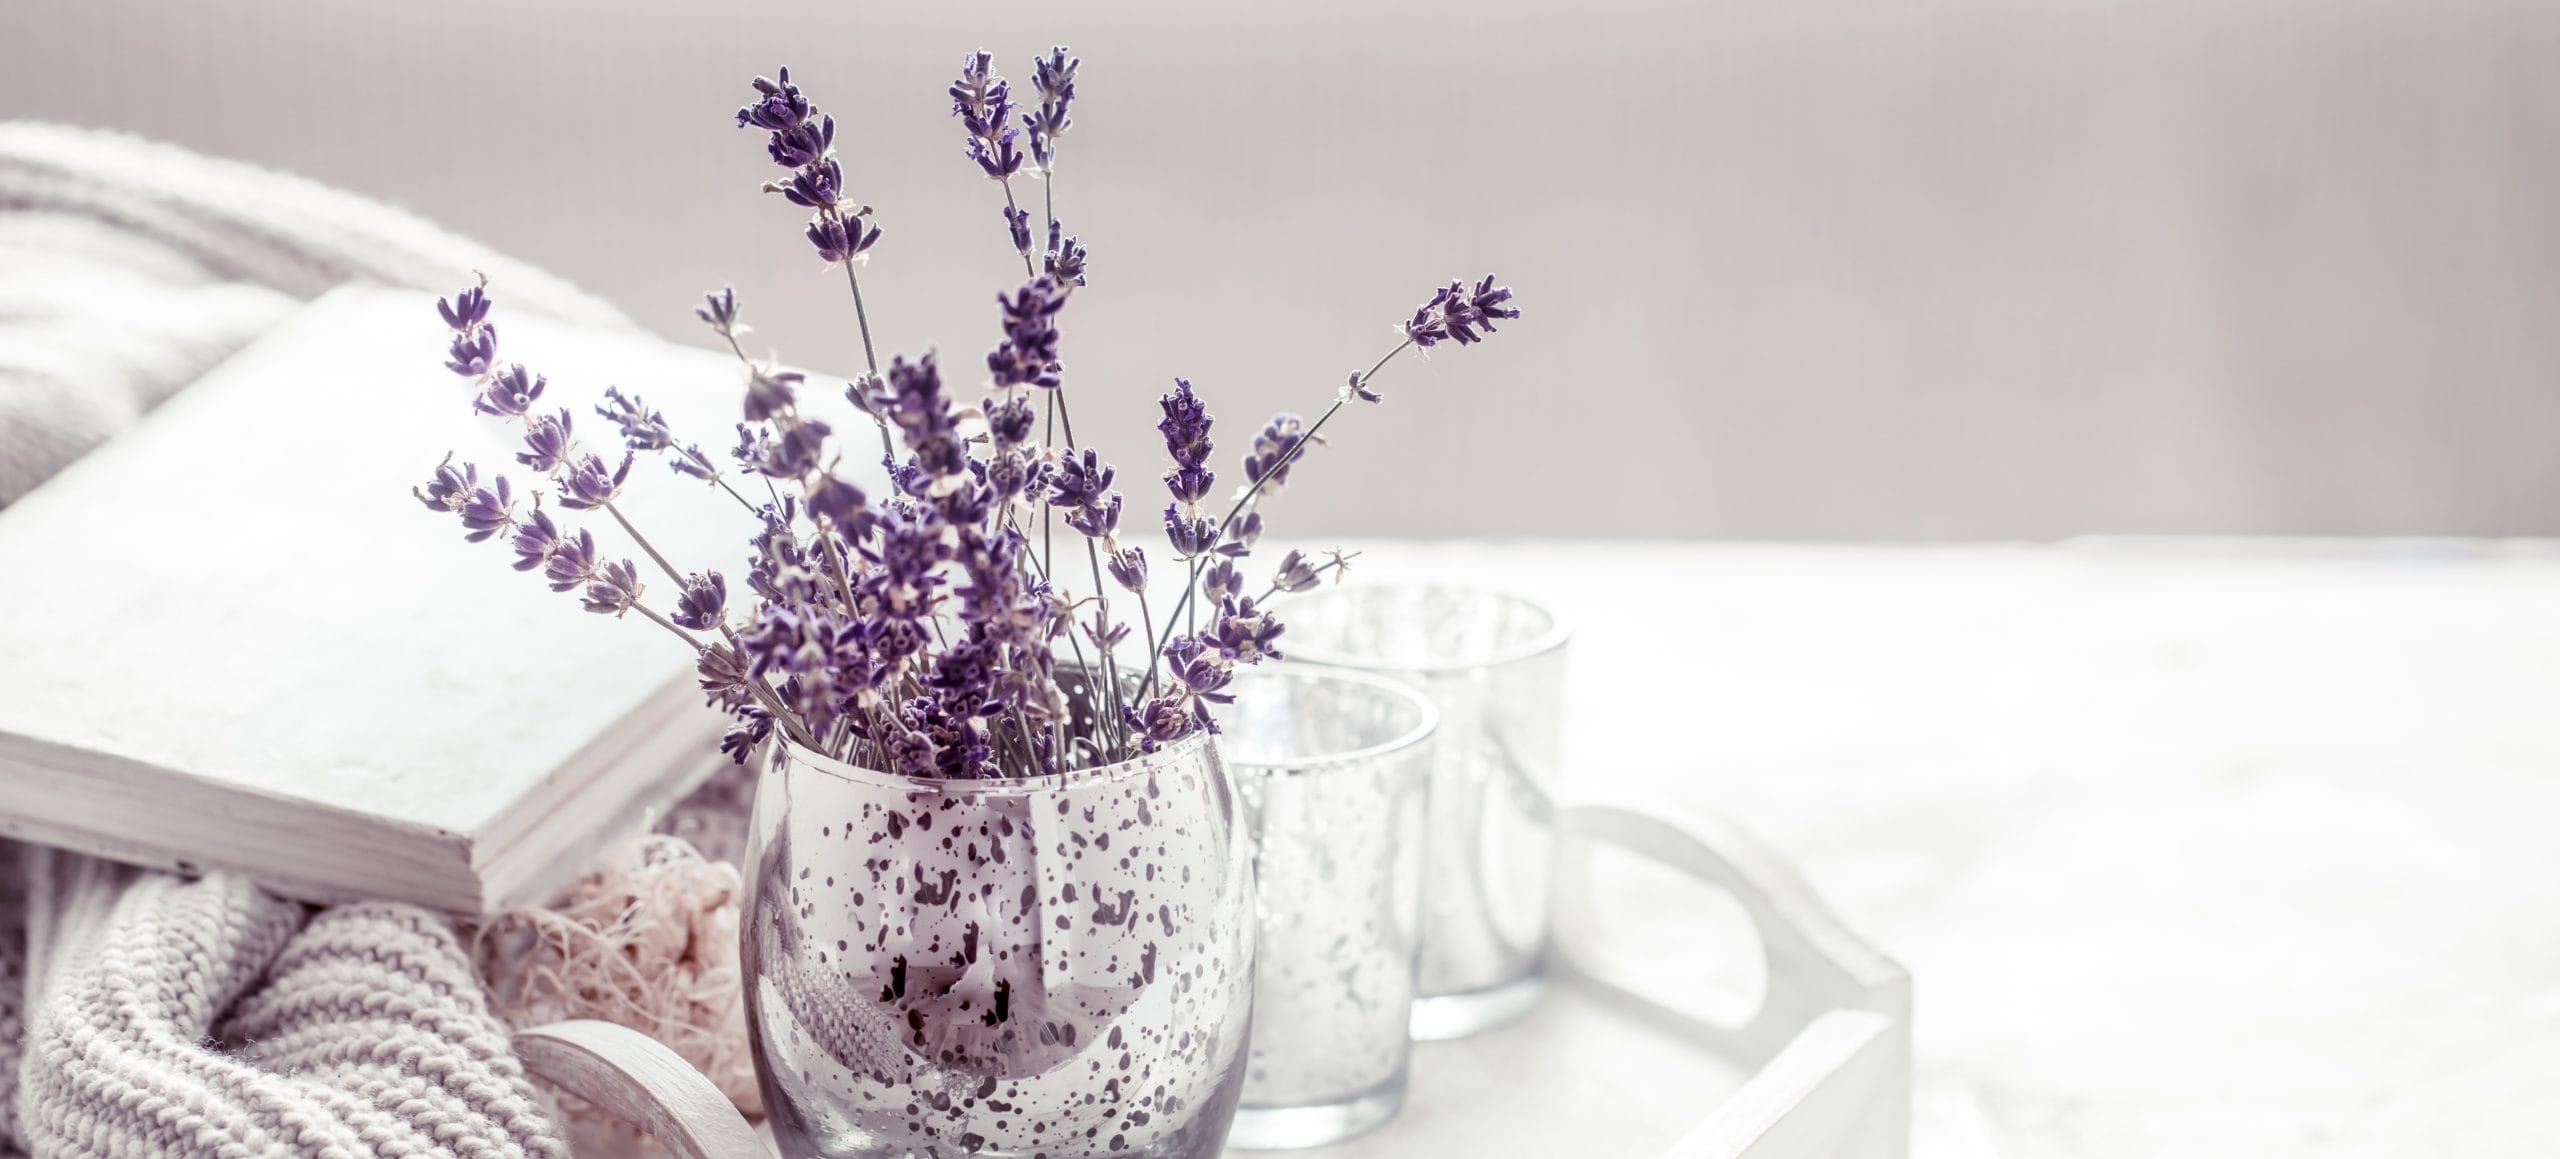 Terpenes: A collection of lavender in a glass vase